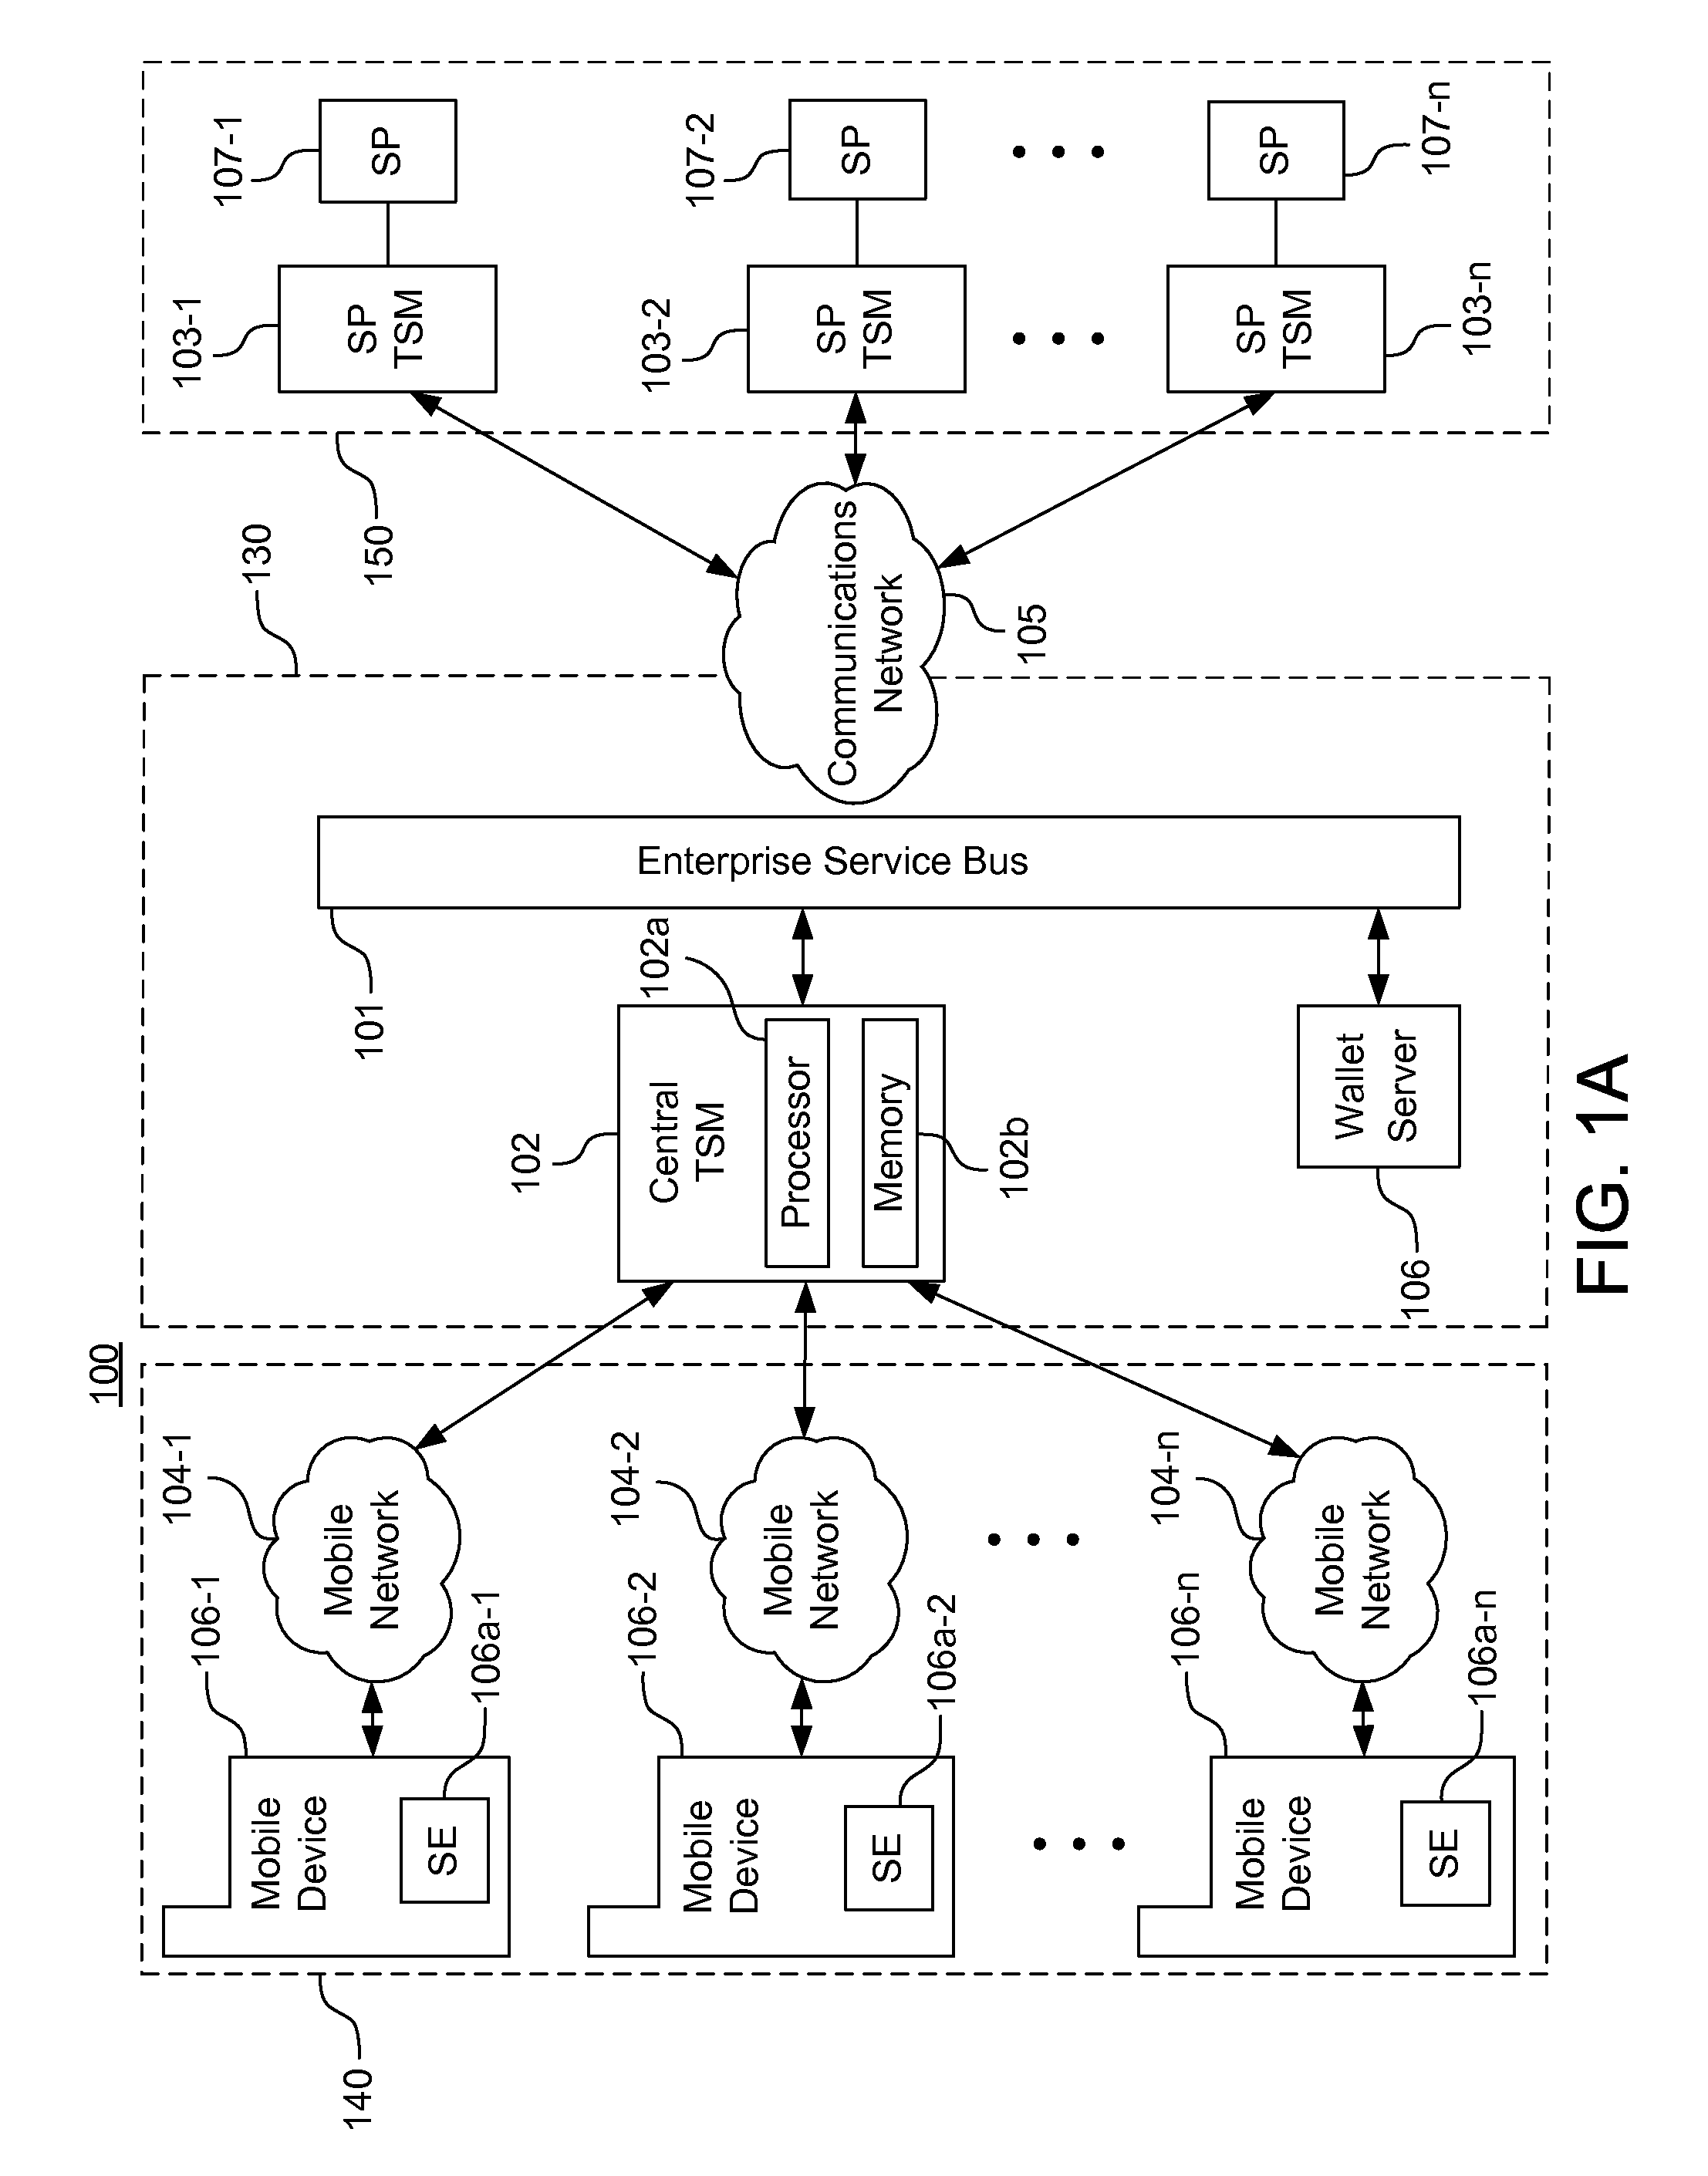 Systems, methods, and computer program products for managing states